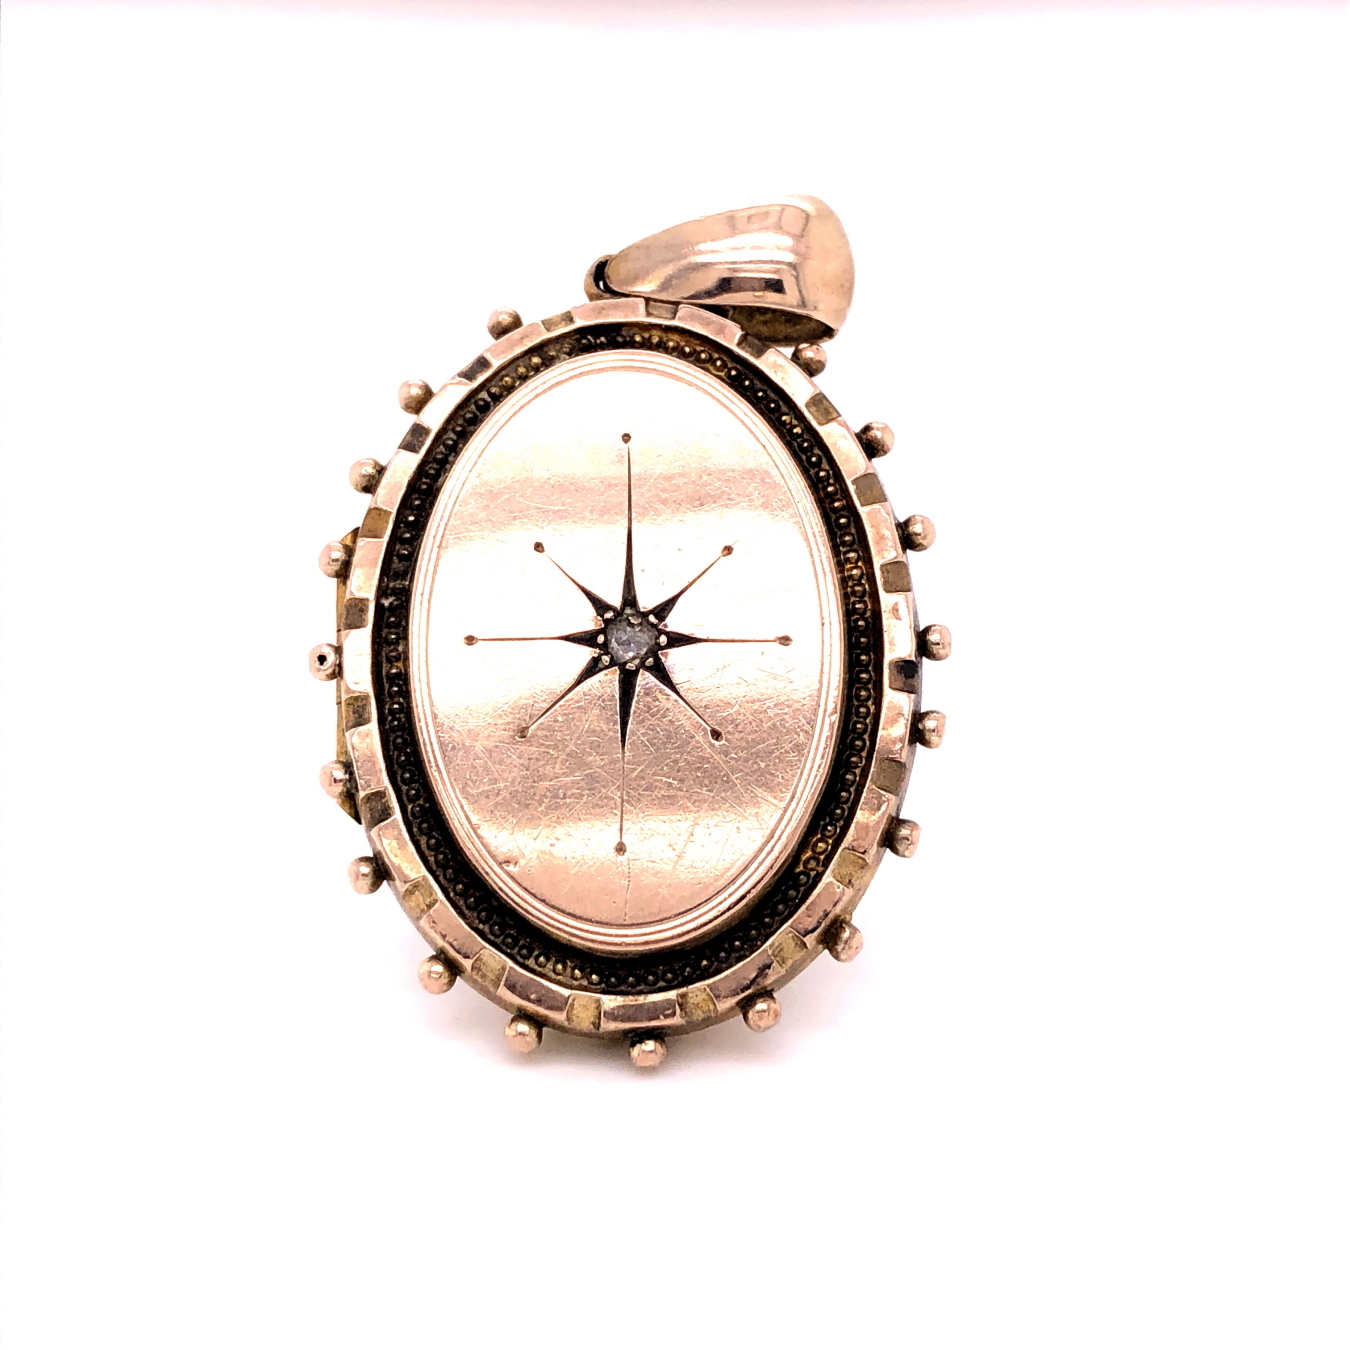 AN ANTIQUE VICTORIAN OVAL GOLD LOCKET WITH AN OLD CUT DIAMOND IN A STARBURST SETTING AND AN ORNATE - Image 2 of 9